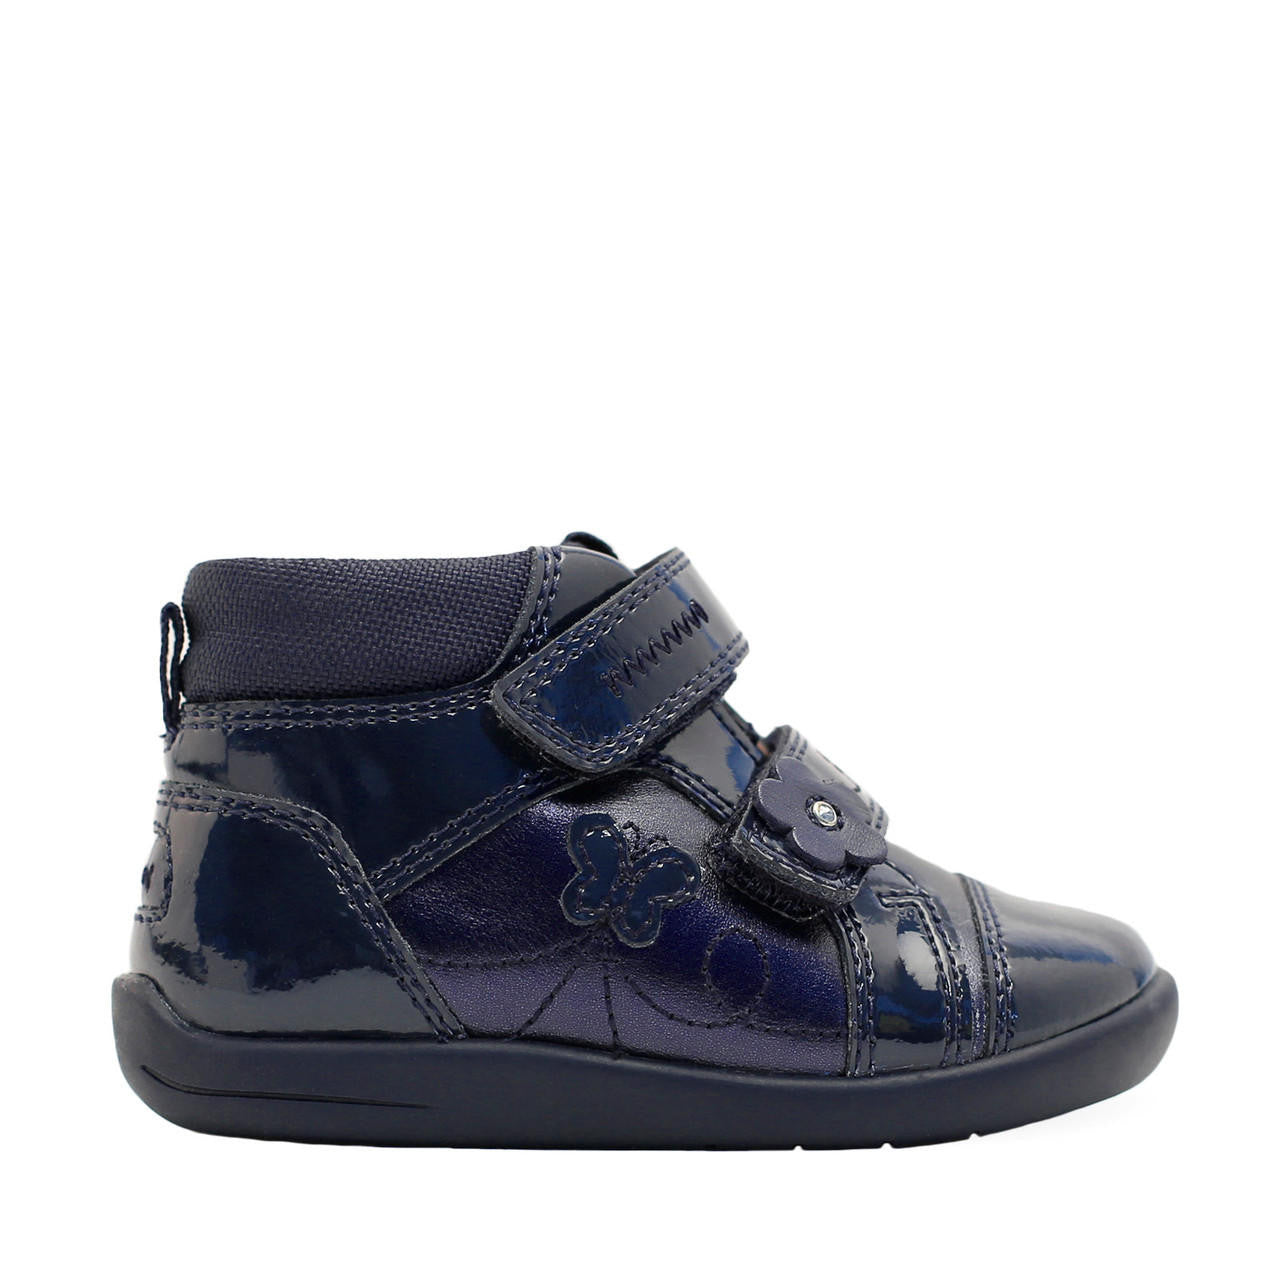 A girls boot by Start-Rite, style Daydream in Navy Patent, with double velcro fastening. Right side view.